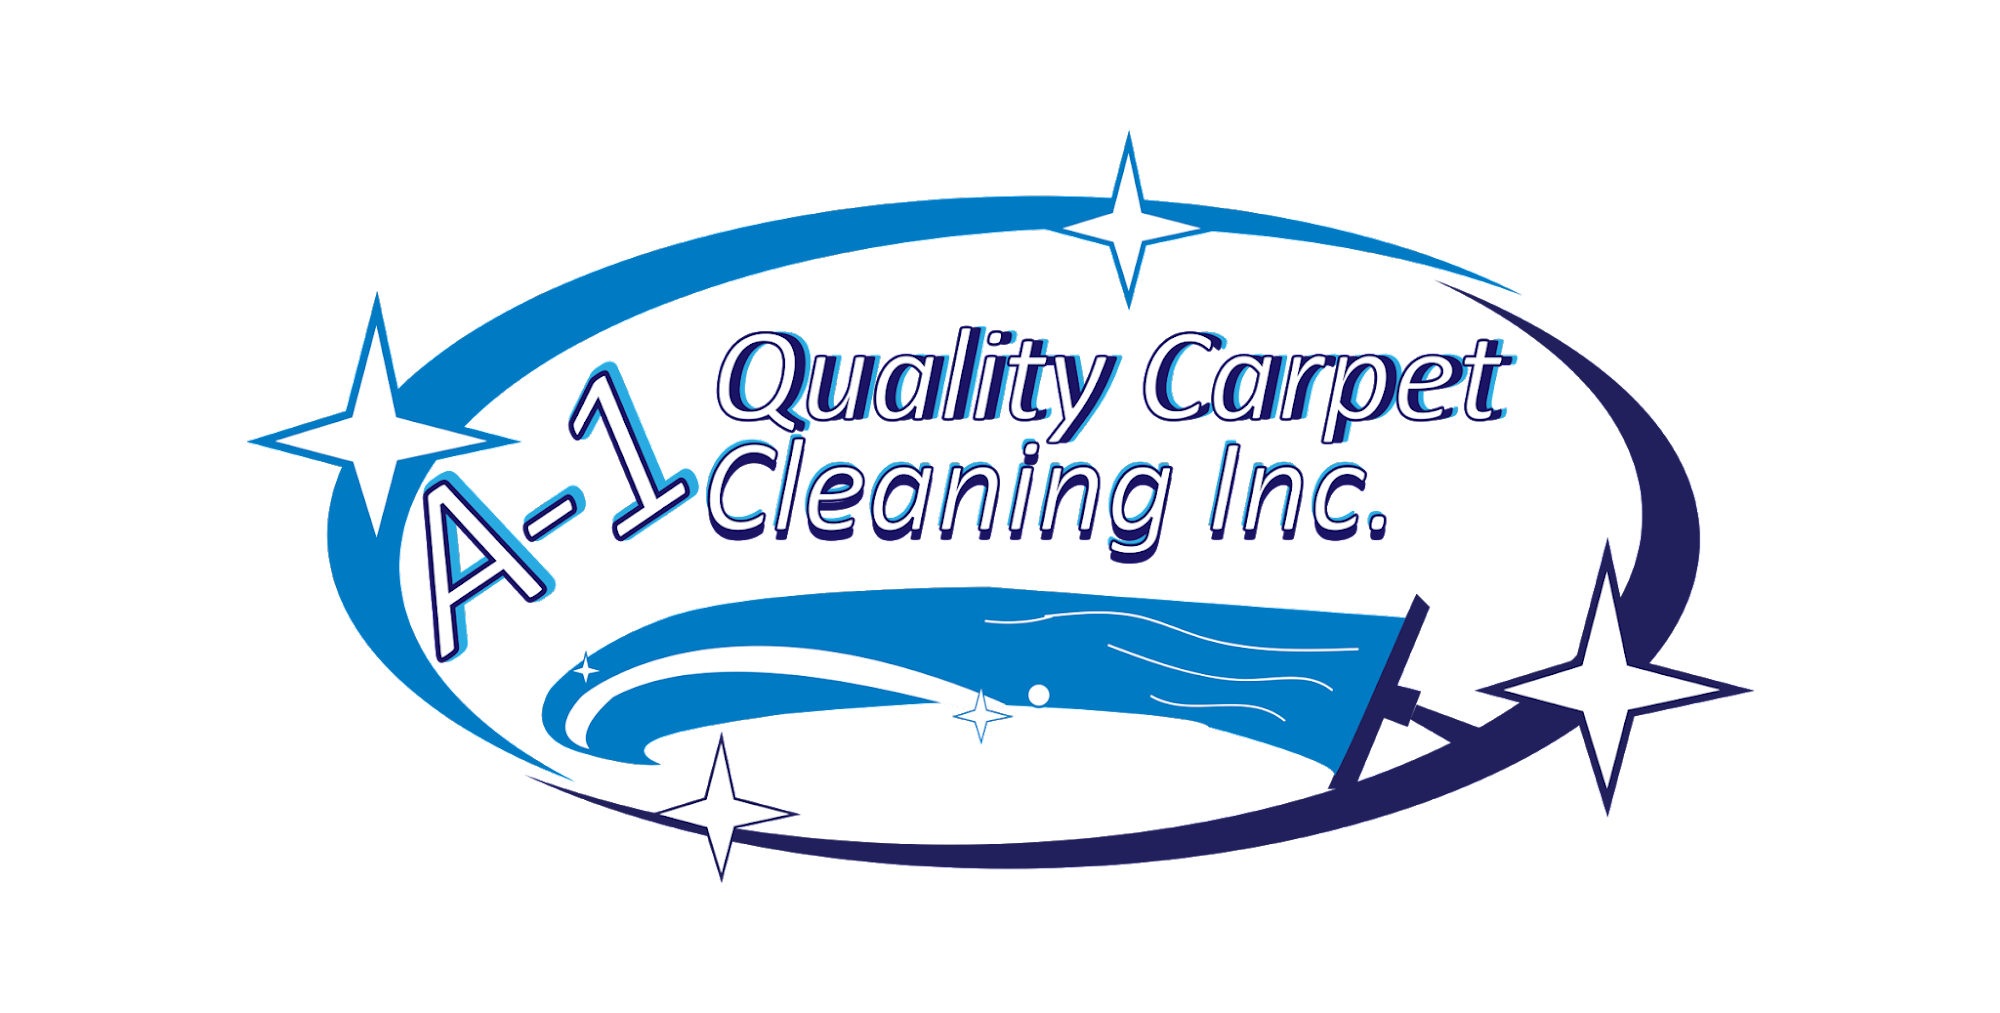 A-1 Quality Carpet Cleaning Inc